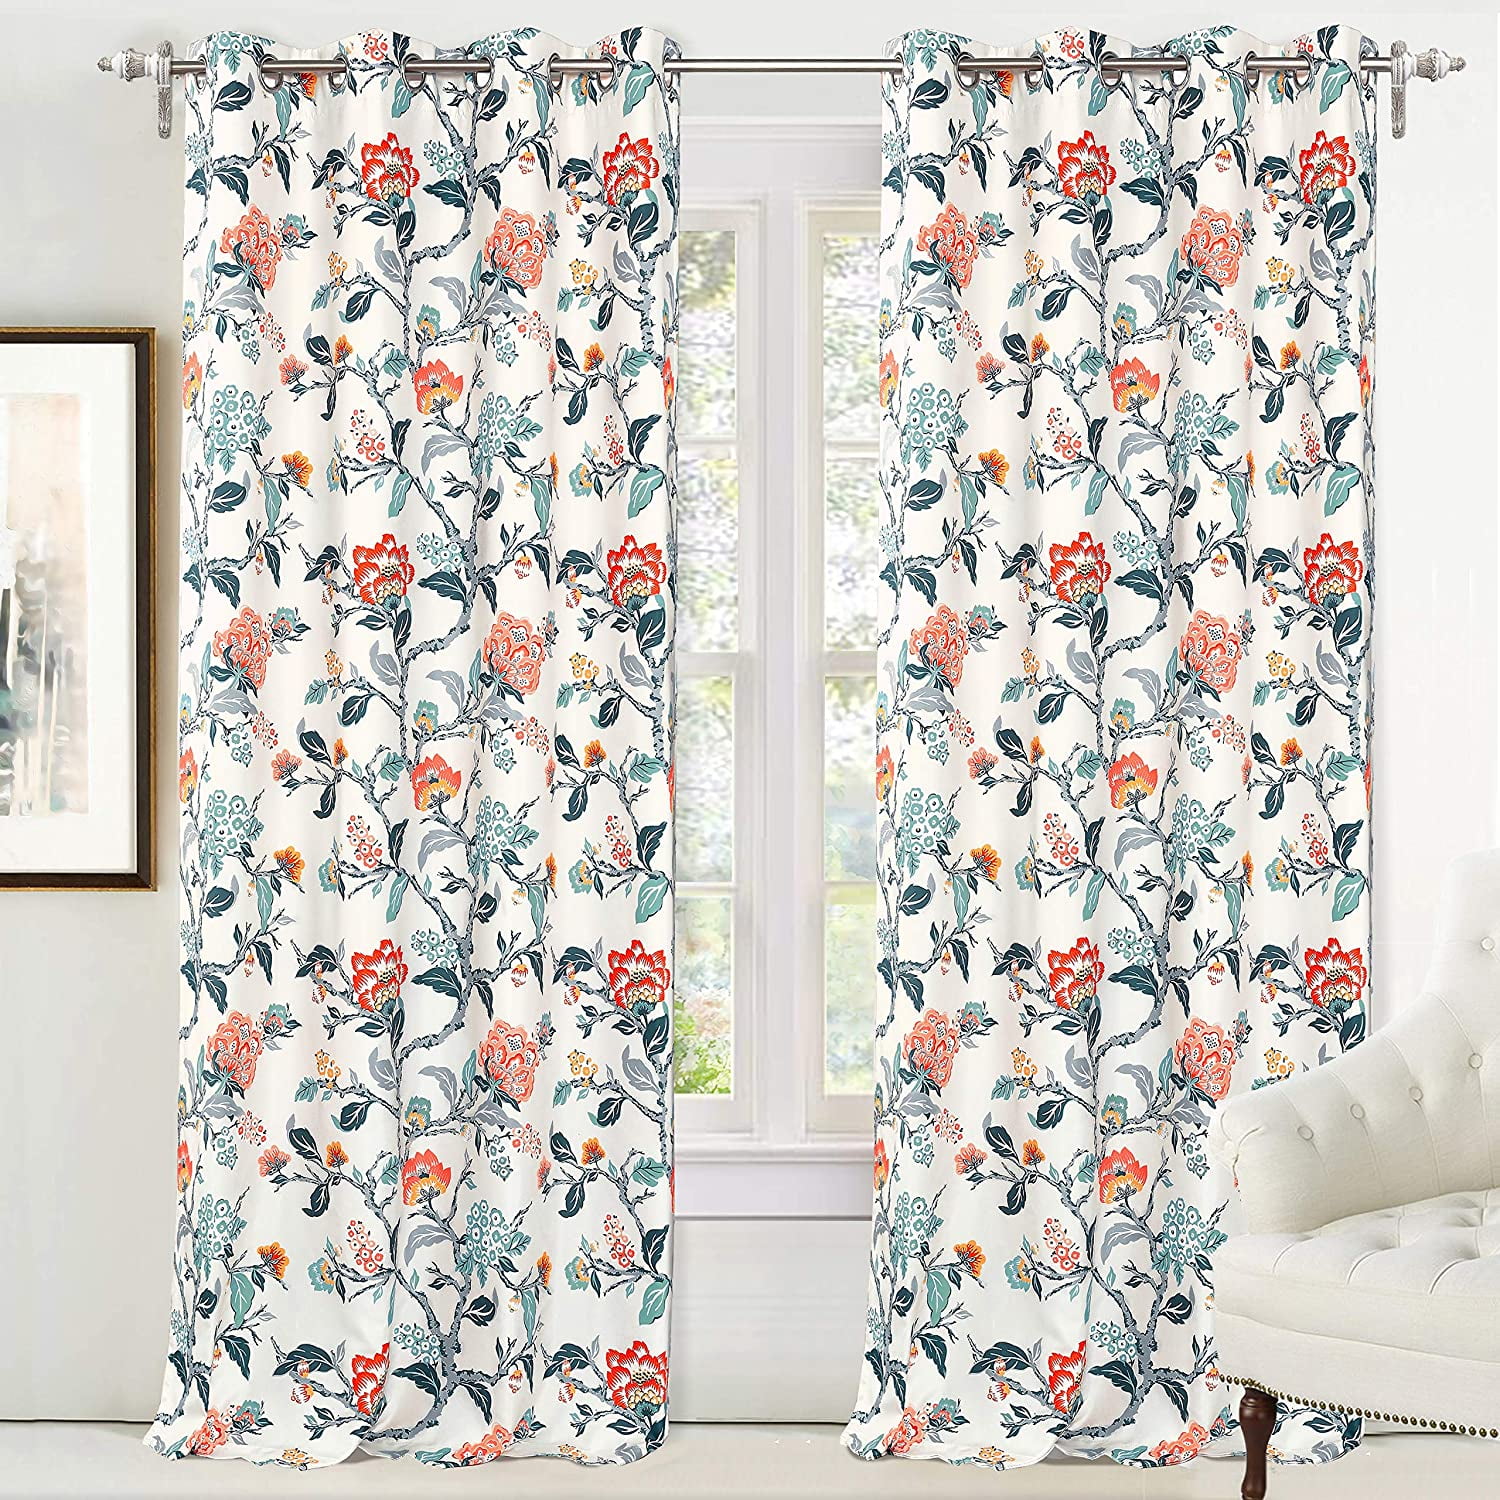 DriftAway Ada Floral Lined Thermal Insulated Room Darkening Blackout  Grommet Window Curtains, 2 Panels, 52 x 63, Ivory Orange Teal 